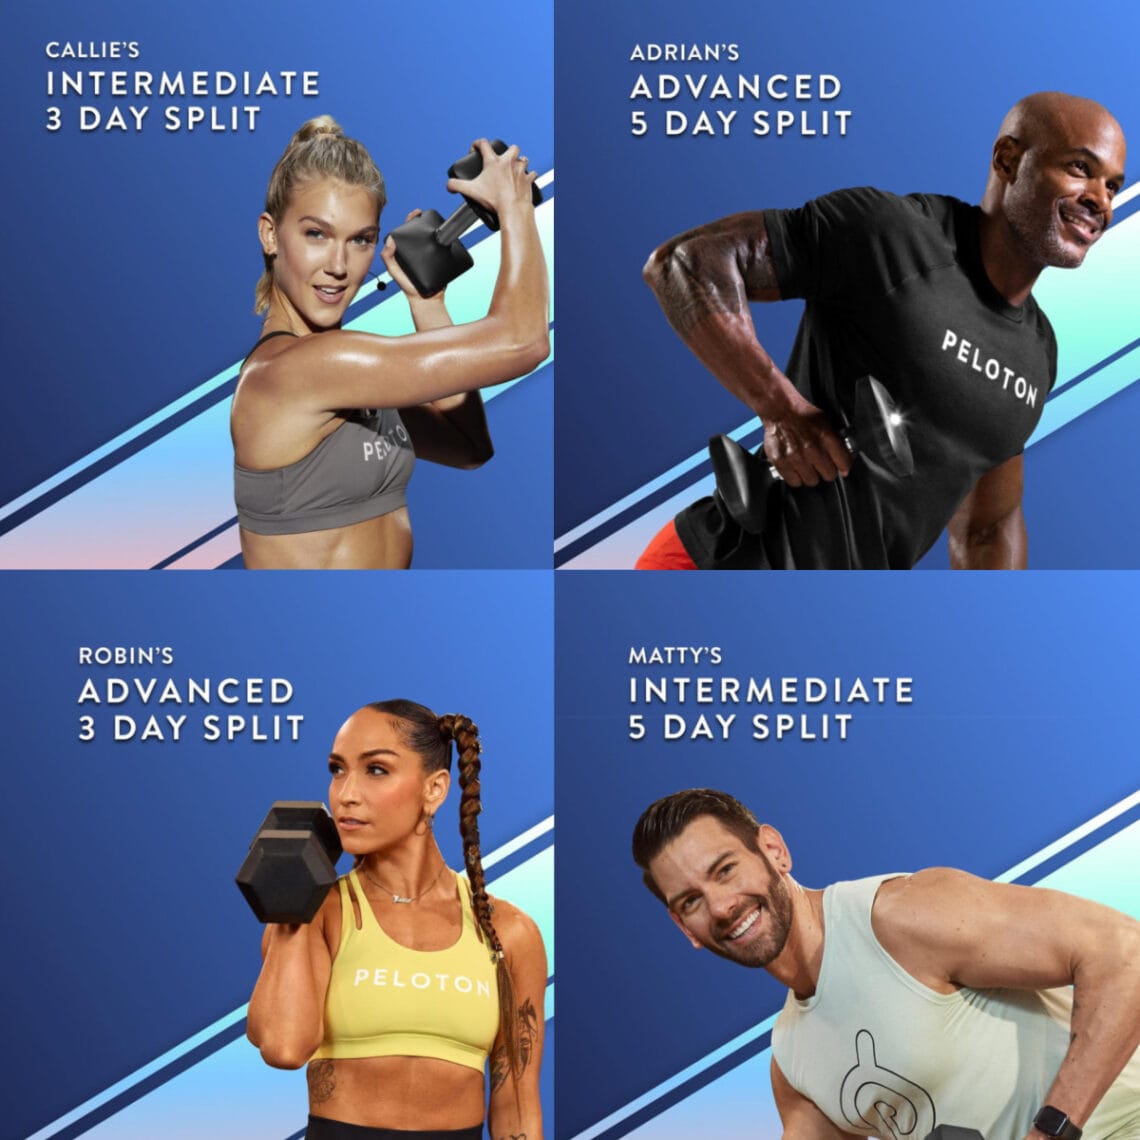 Peloton Releases Four New Split Strength Programs With Adrian Callie Matty And Robin 